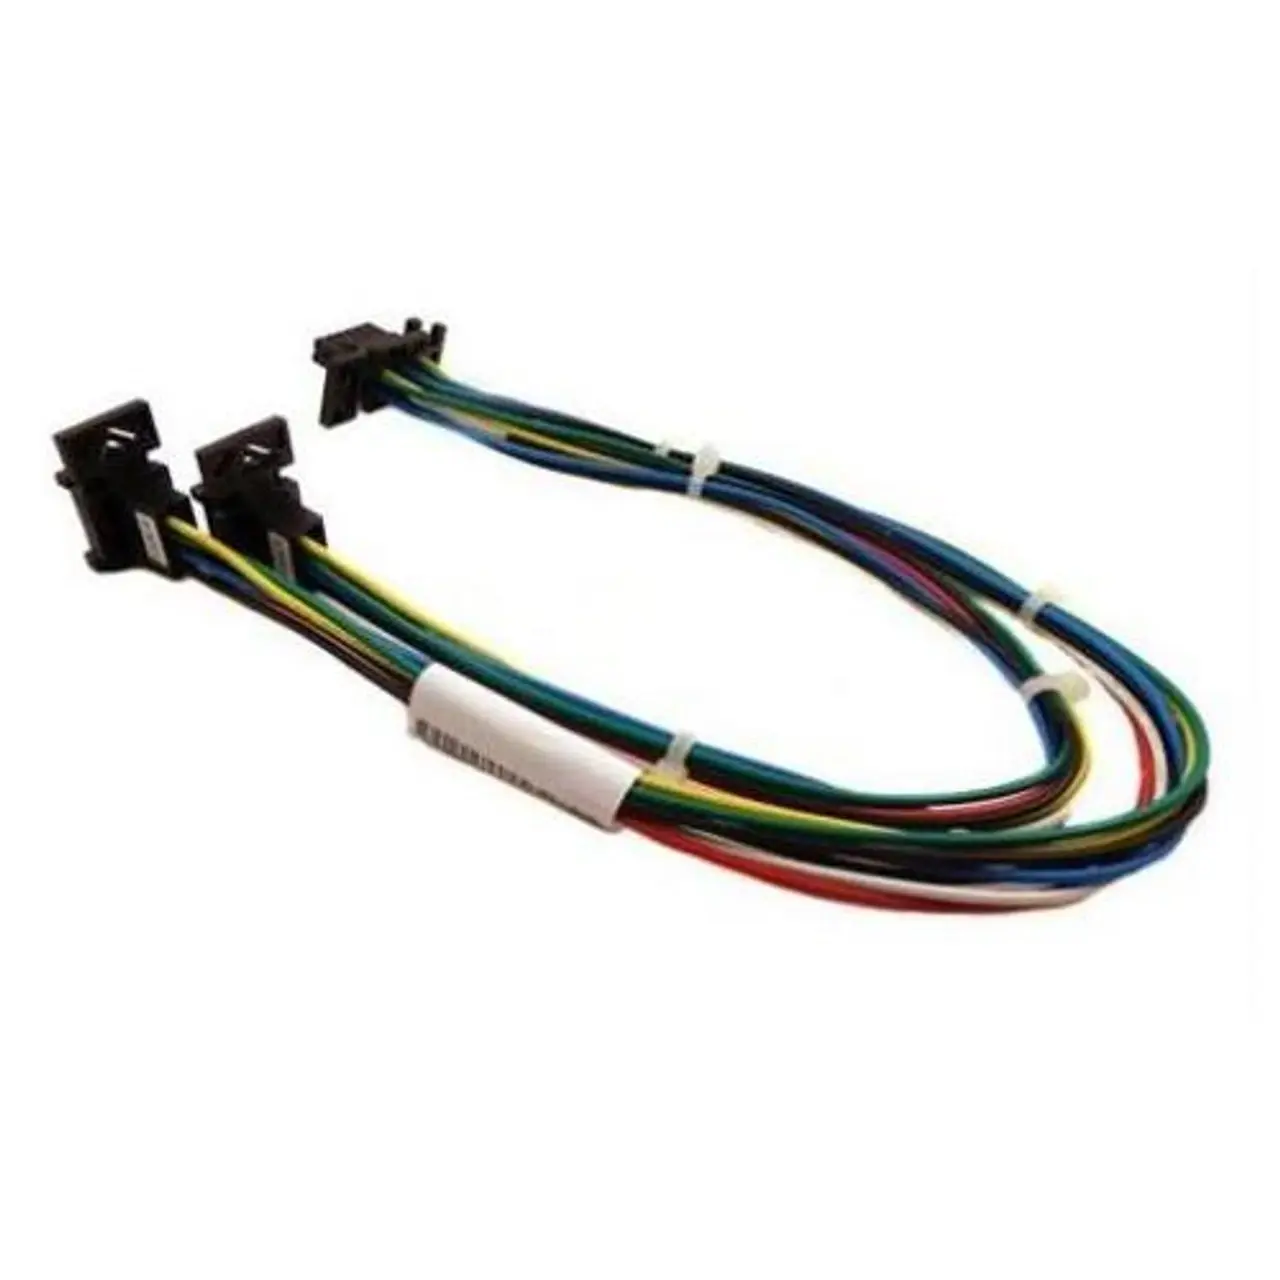 04N5743 IBM Fan Signal Cable Assembly